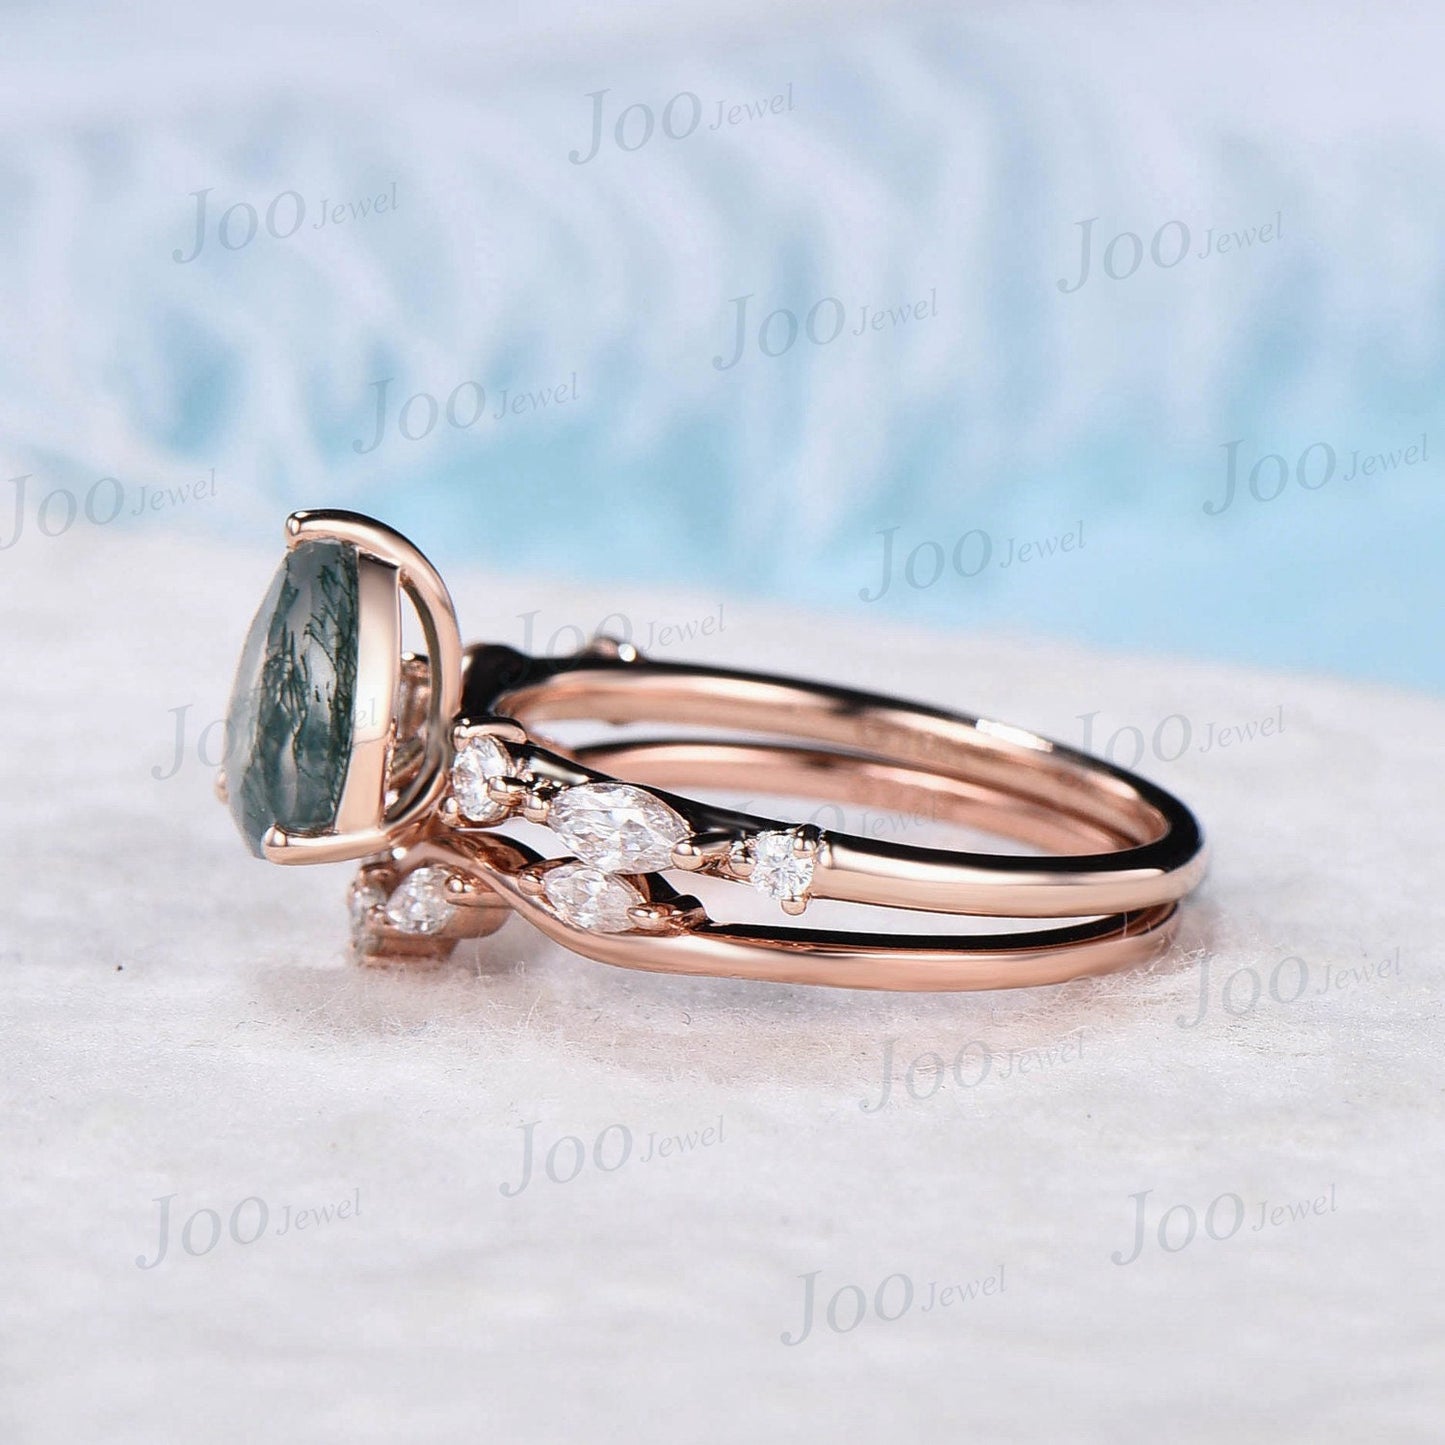 1.25ct Pear Natural Moss Agate Promise Ring Set Green Gemstone Jewelry Half Eternity Curve Moissanite Wedding Band Nature Moss Bridal Set